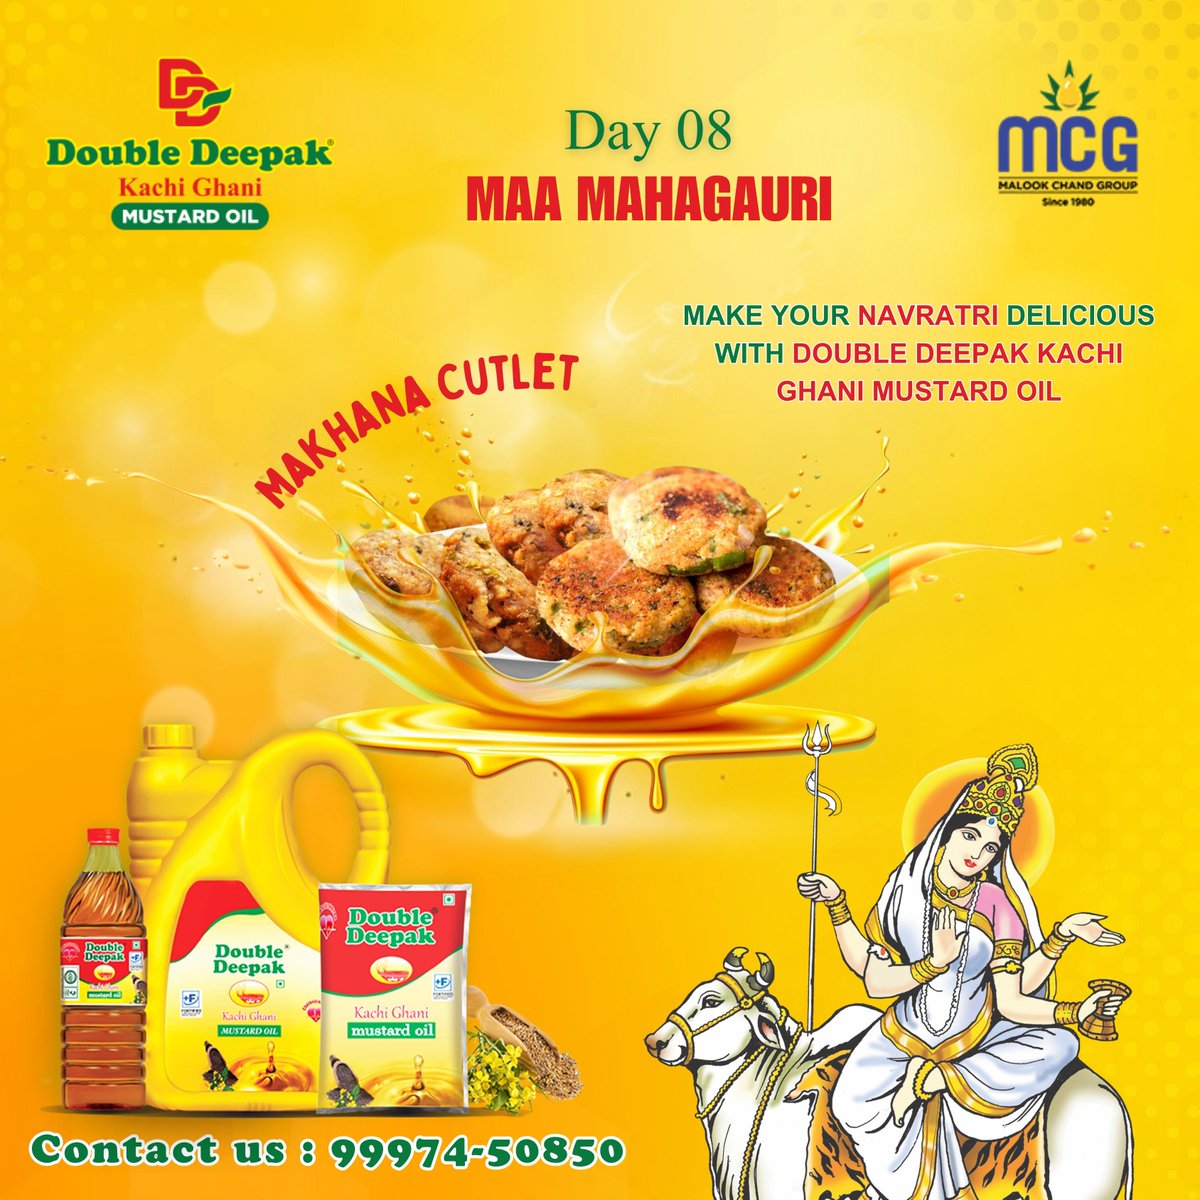 May the divine radiance of Maa Mahagauri light up your path and bless you with prosperity and peace.
Maa Mahagauri
#MaaMahagauri #doubledeepak #kachighani #edibleoil #mustardoil #healthyoil #sarsontel #bestoil #food #foodie #foodlover #breakfast #delicious #yummy #cooking